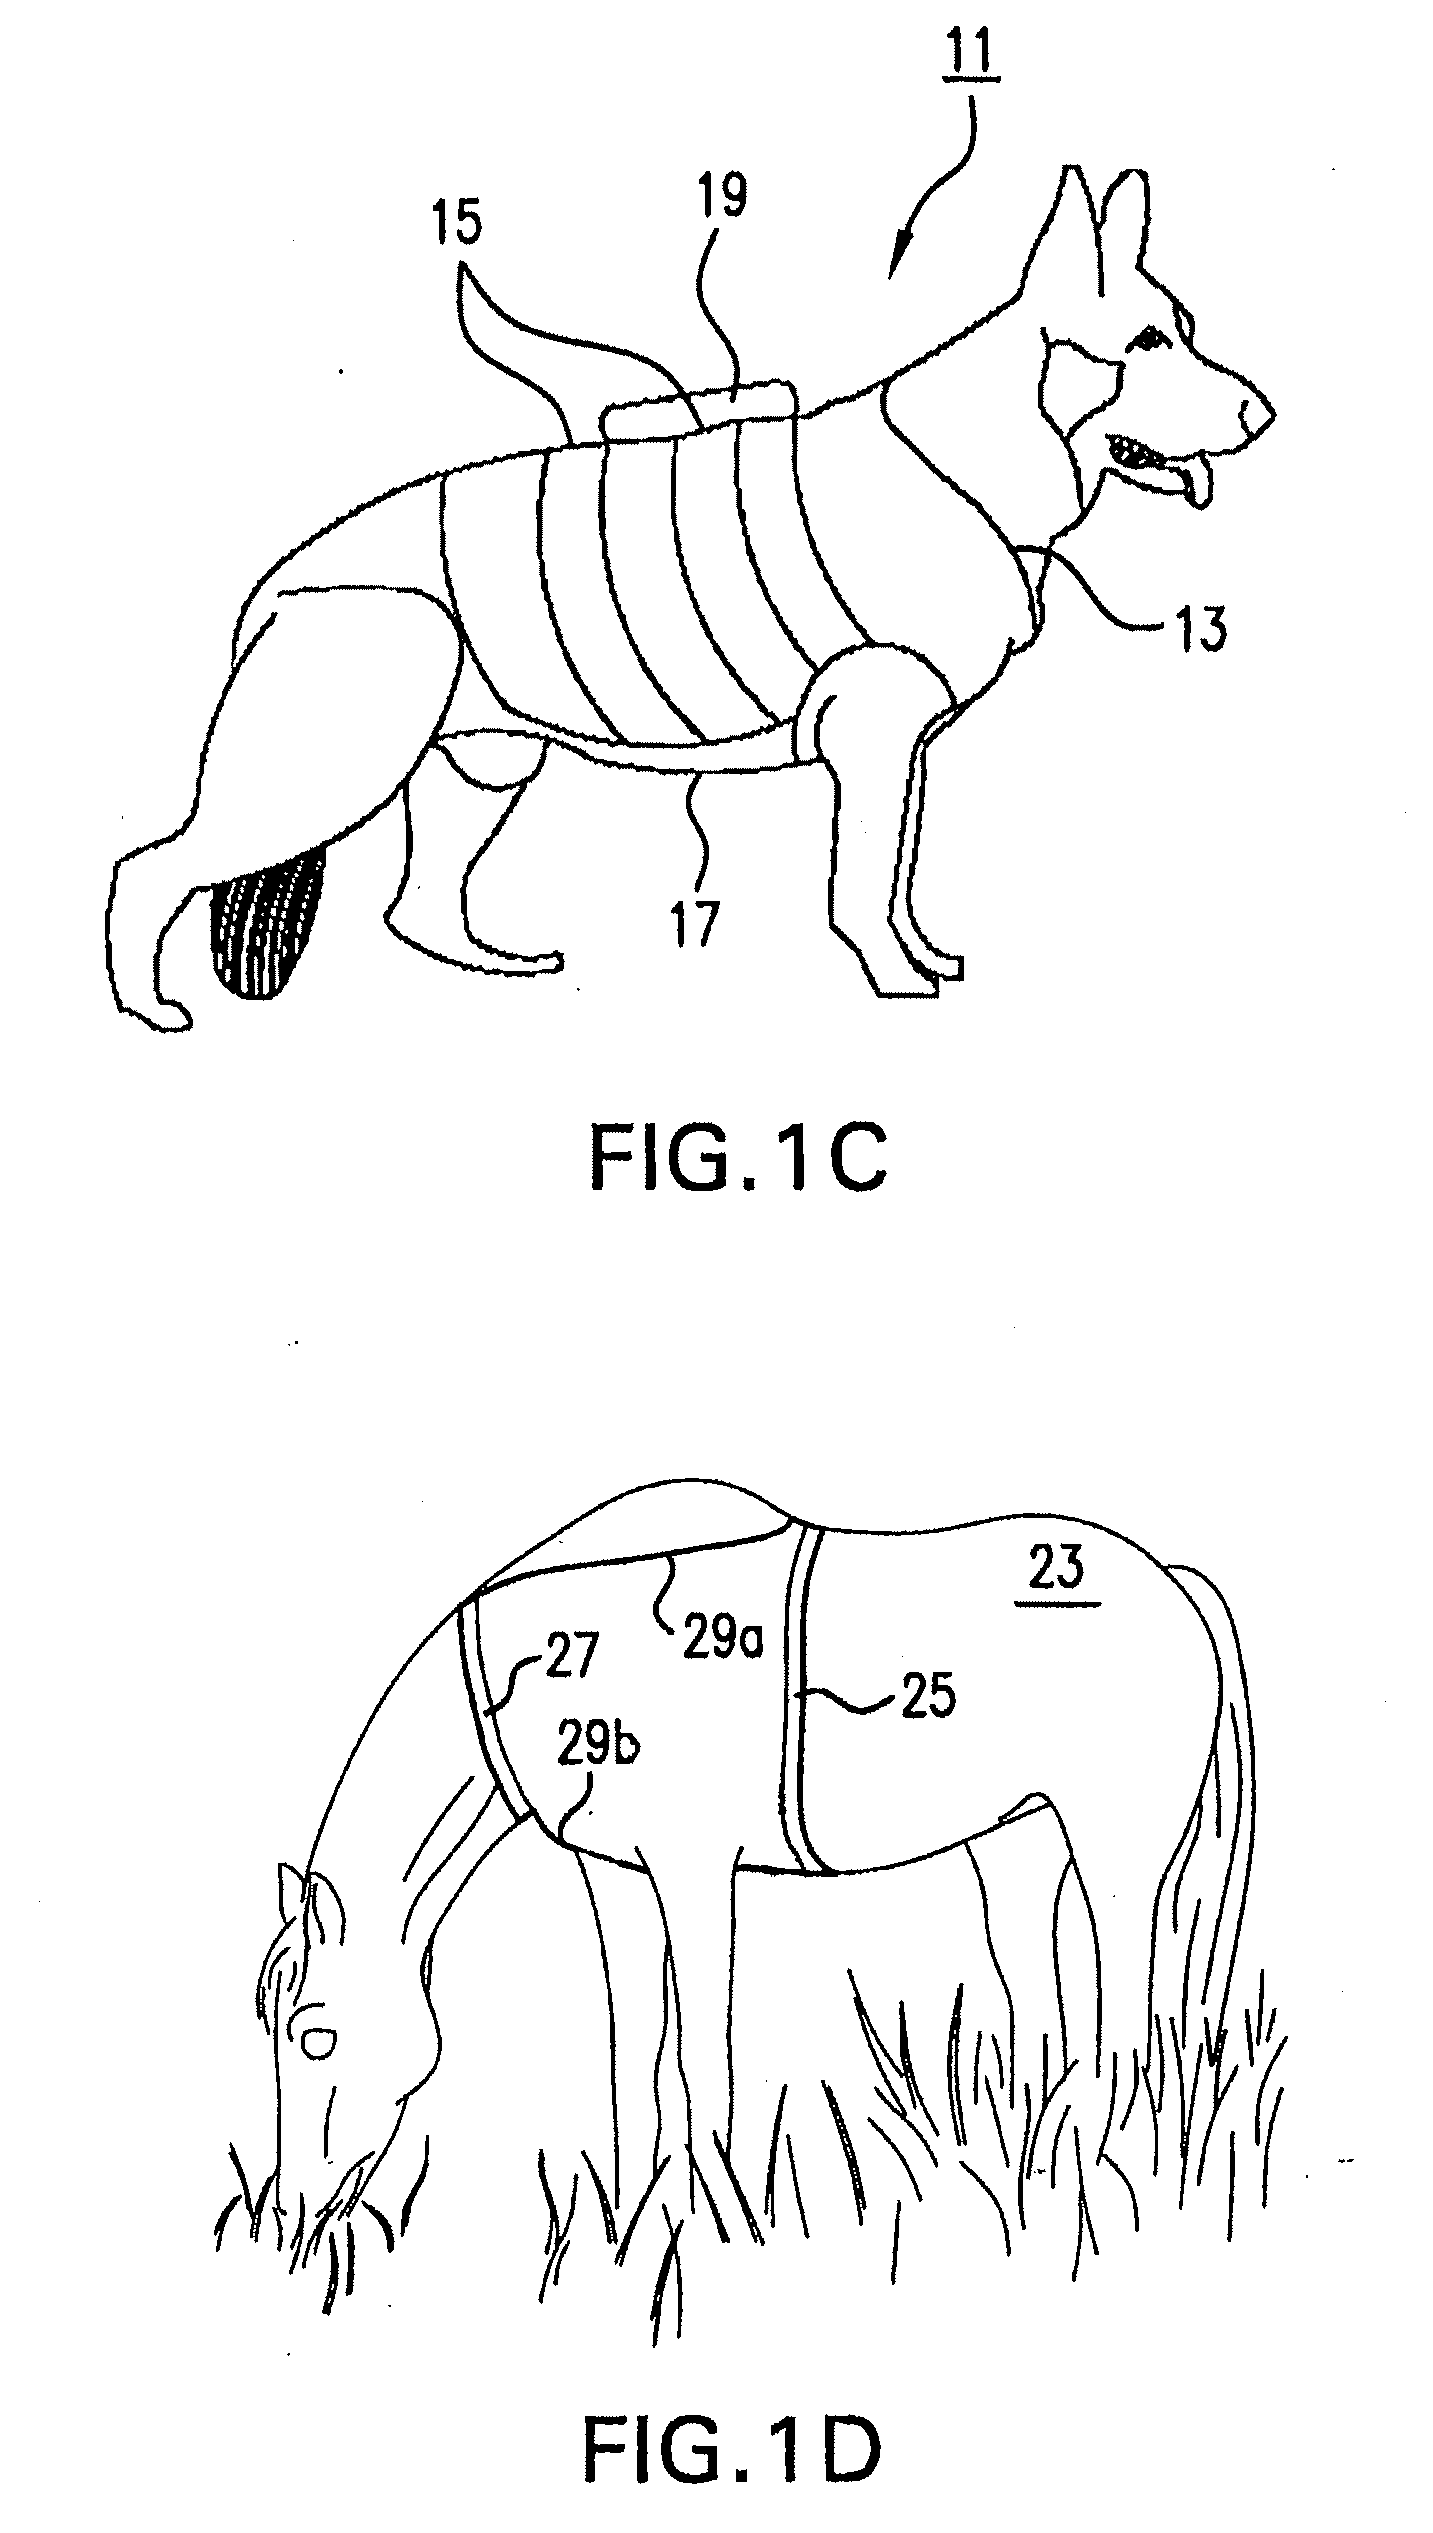 Systems and methods for non-invasive physiological monitoring of non-human animals